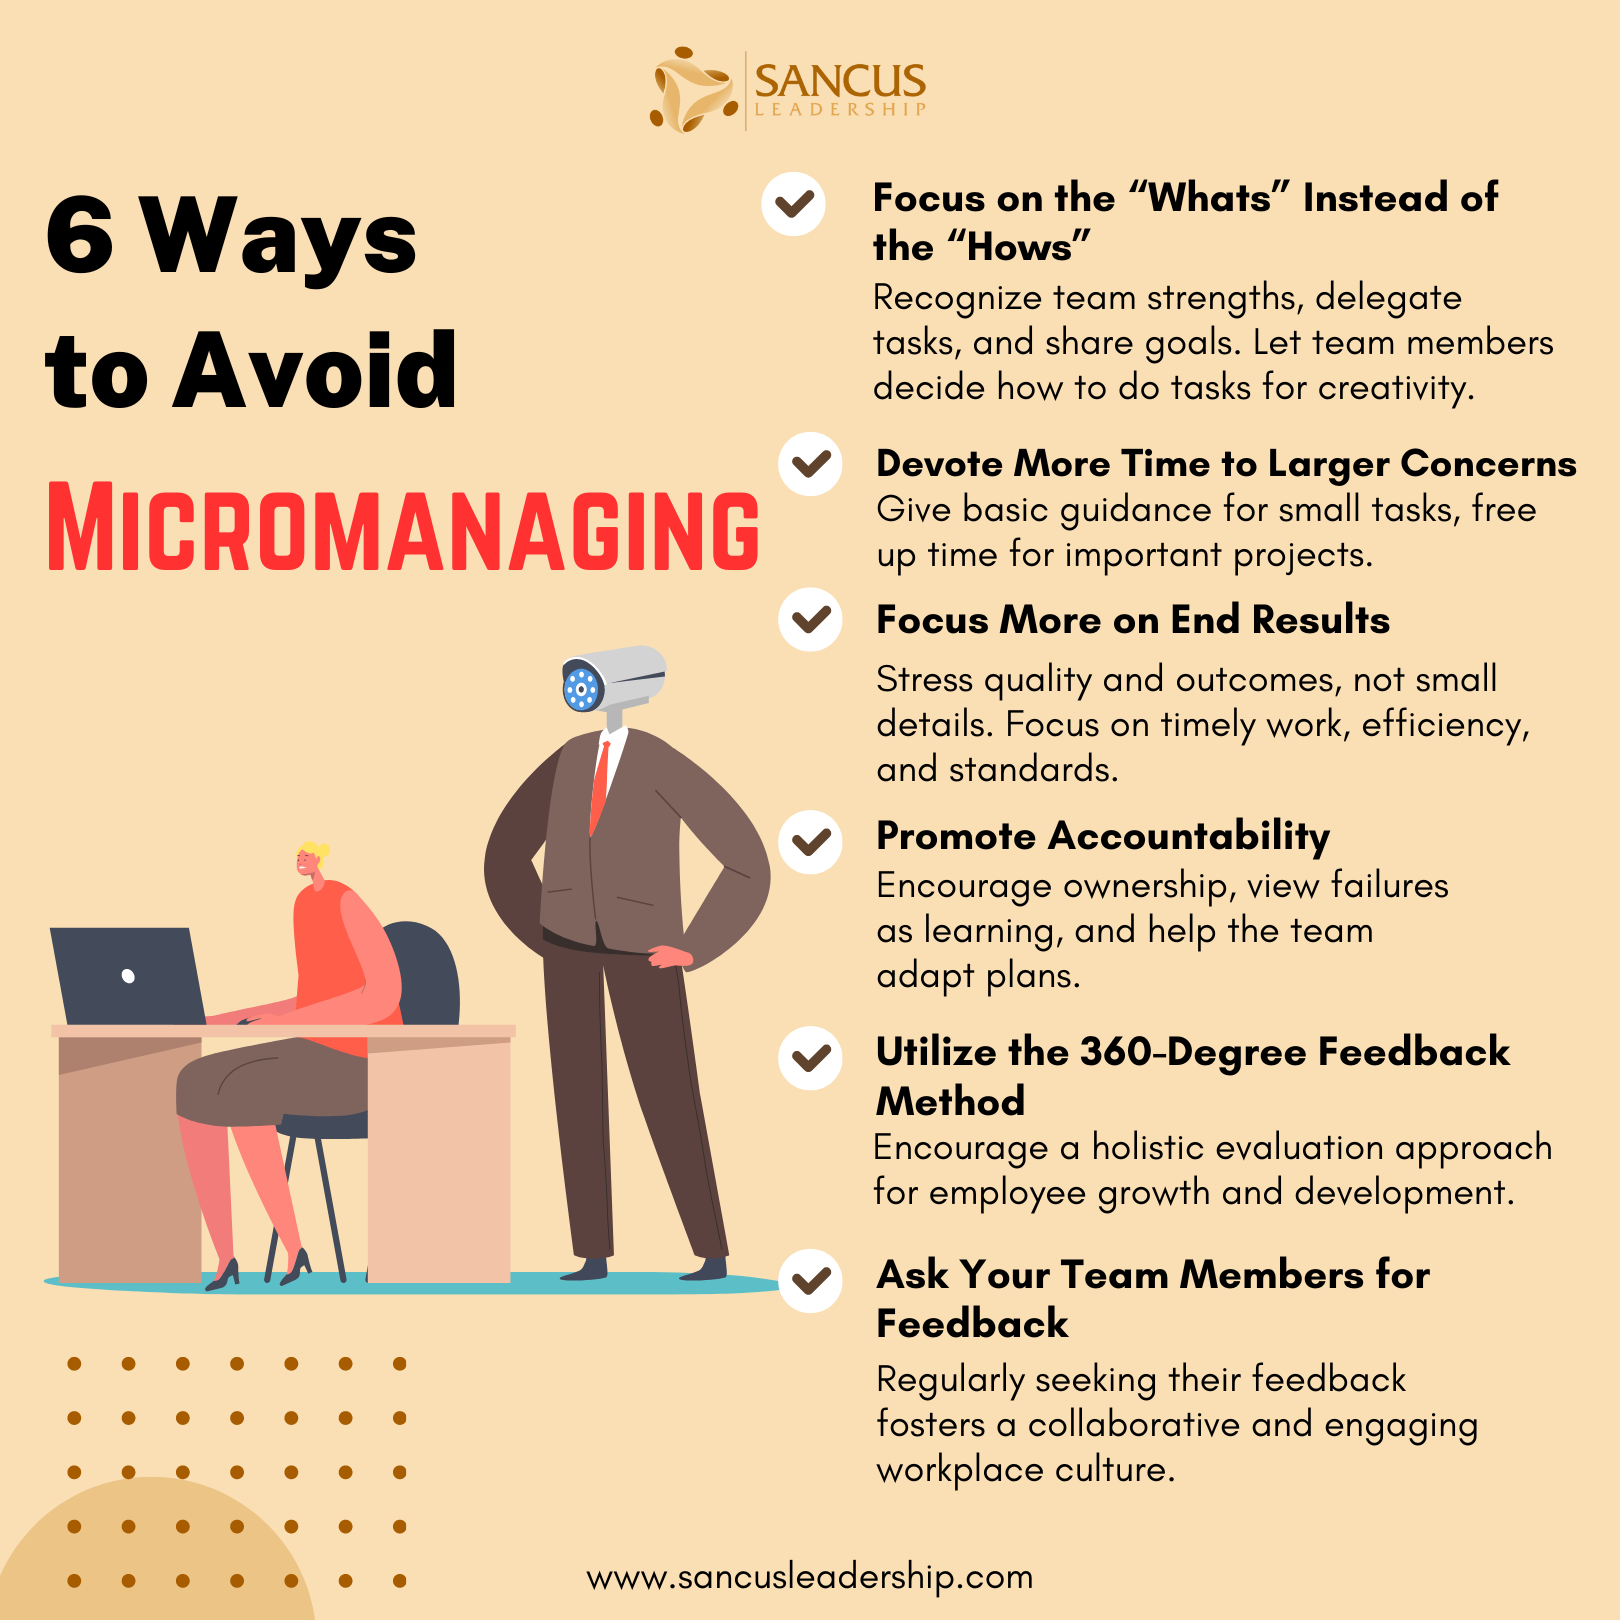 How to avoid micromanaging